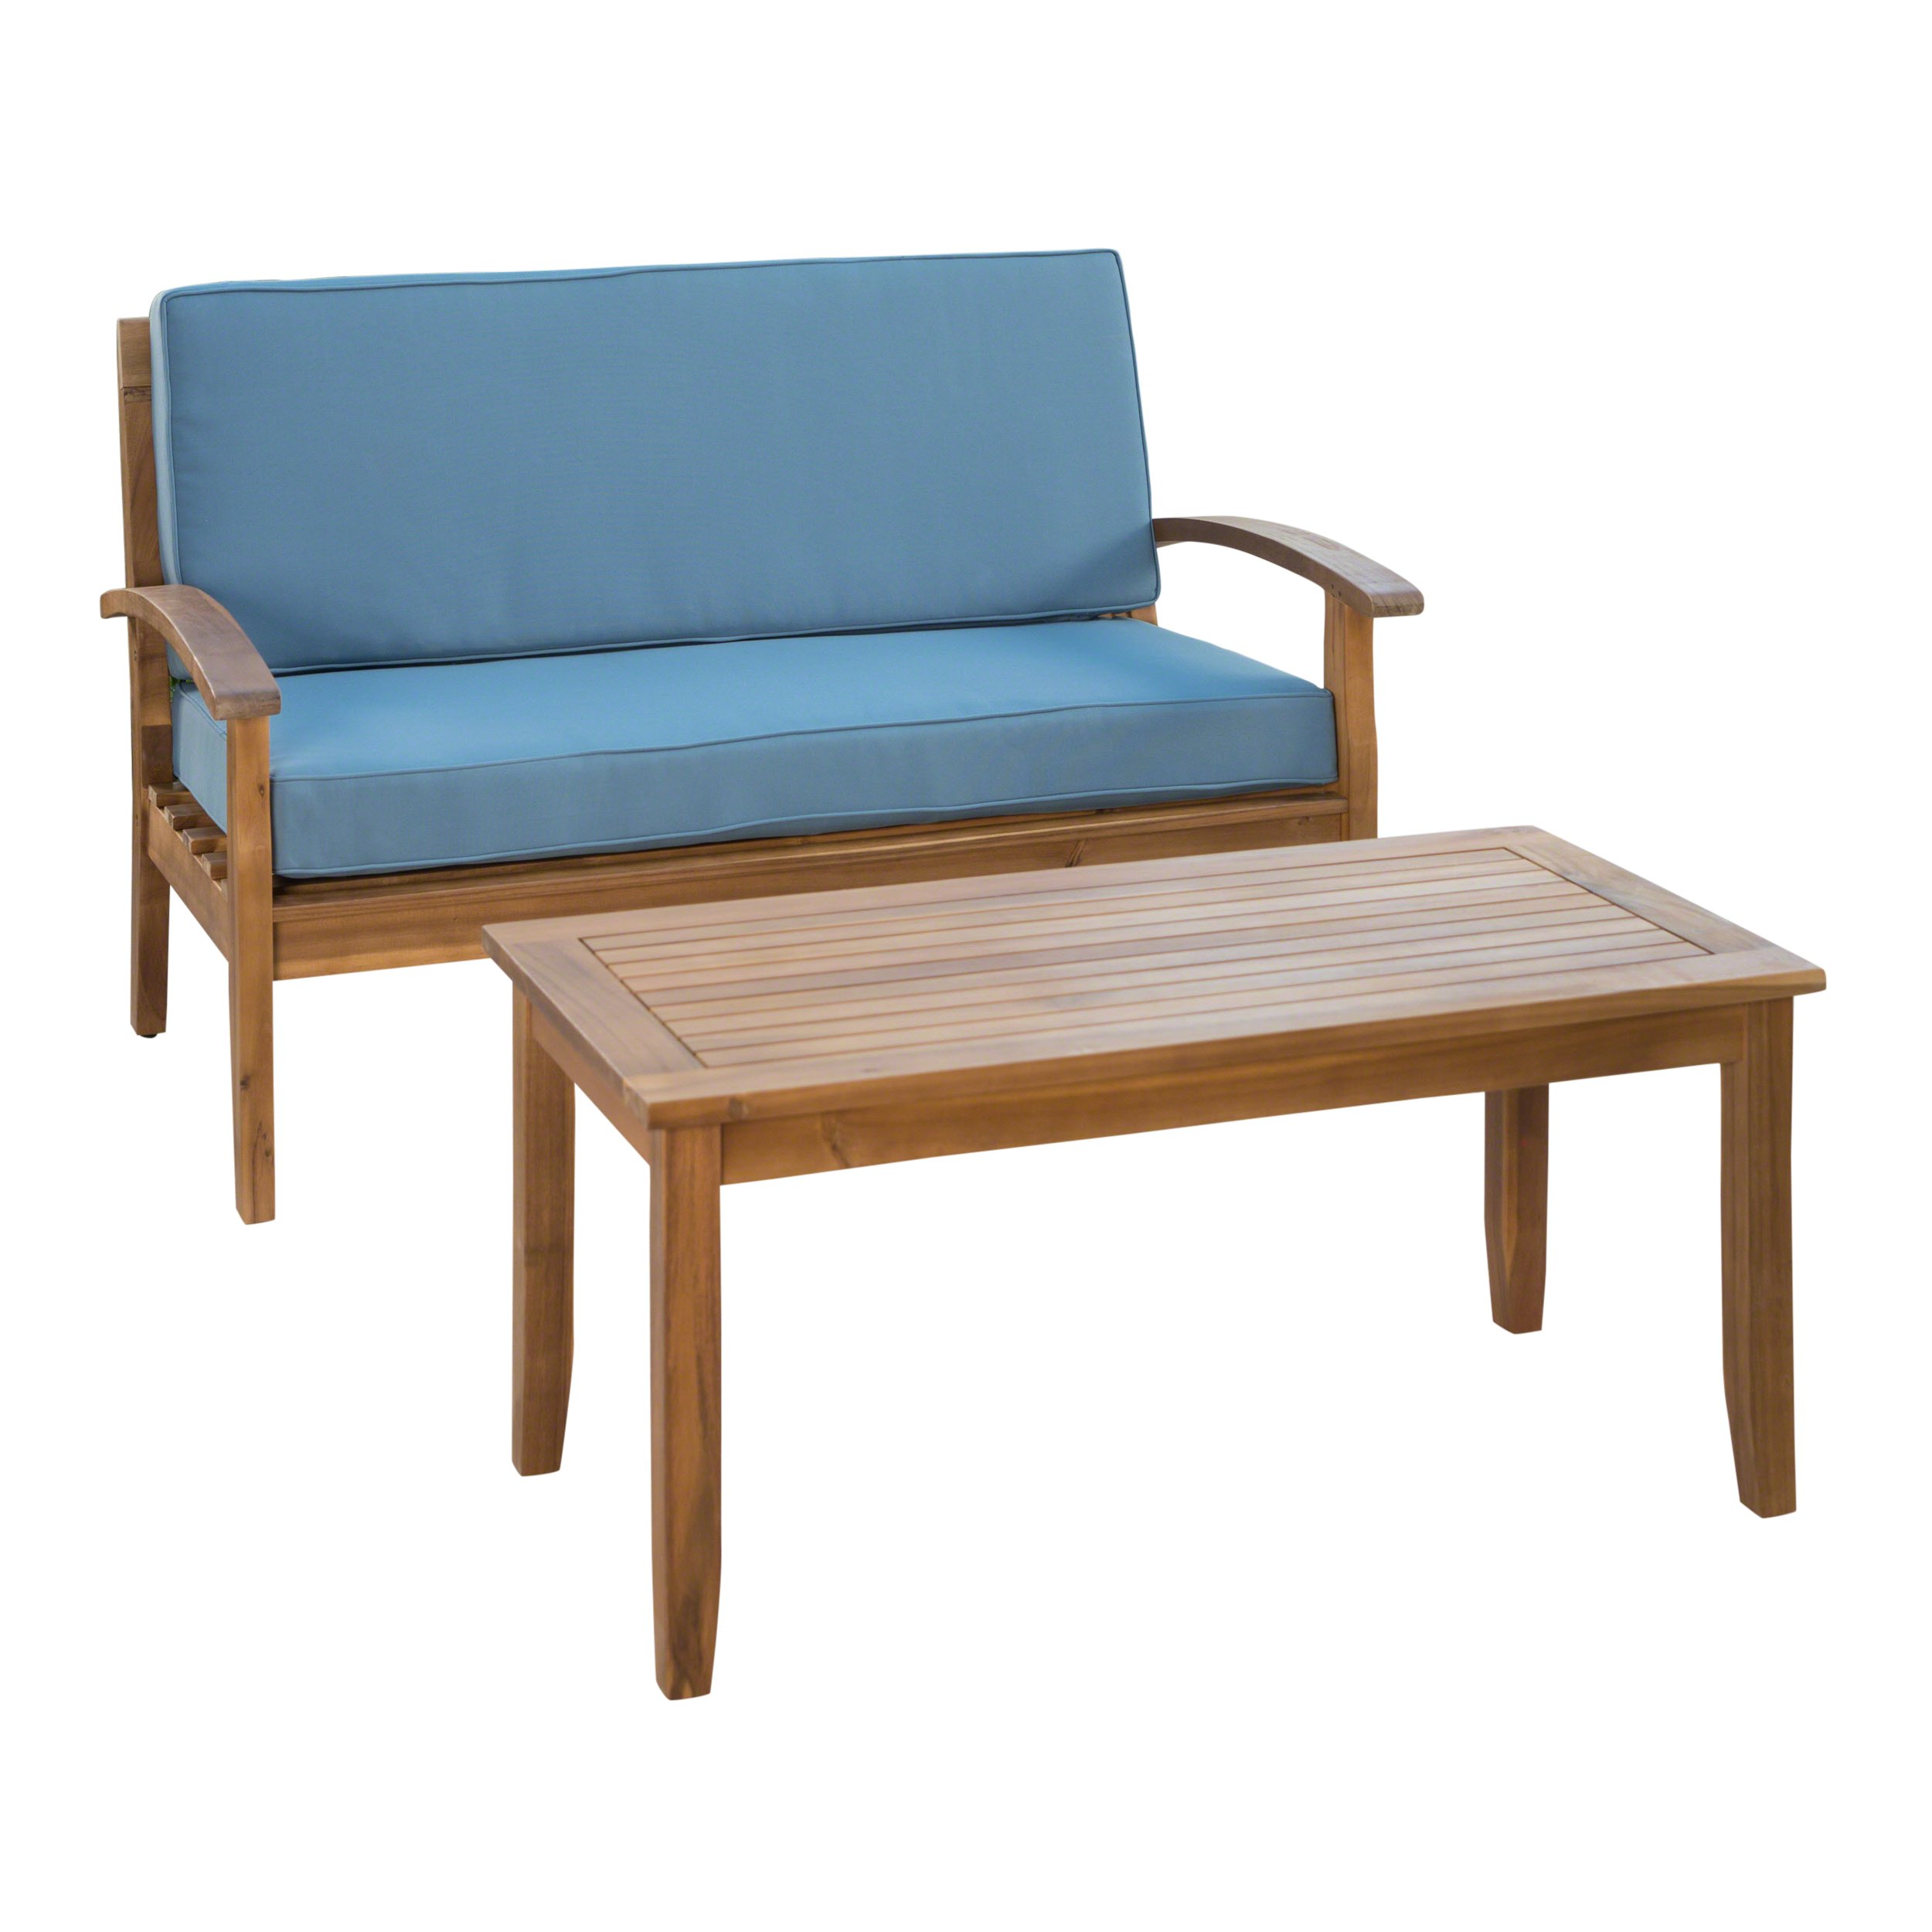 2-Piece Christopher Knight Home Peyton Outdoor Acacia Wood Loveseat & Coffee Table Set w/ Cushions $192 + Free Shipping